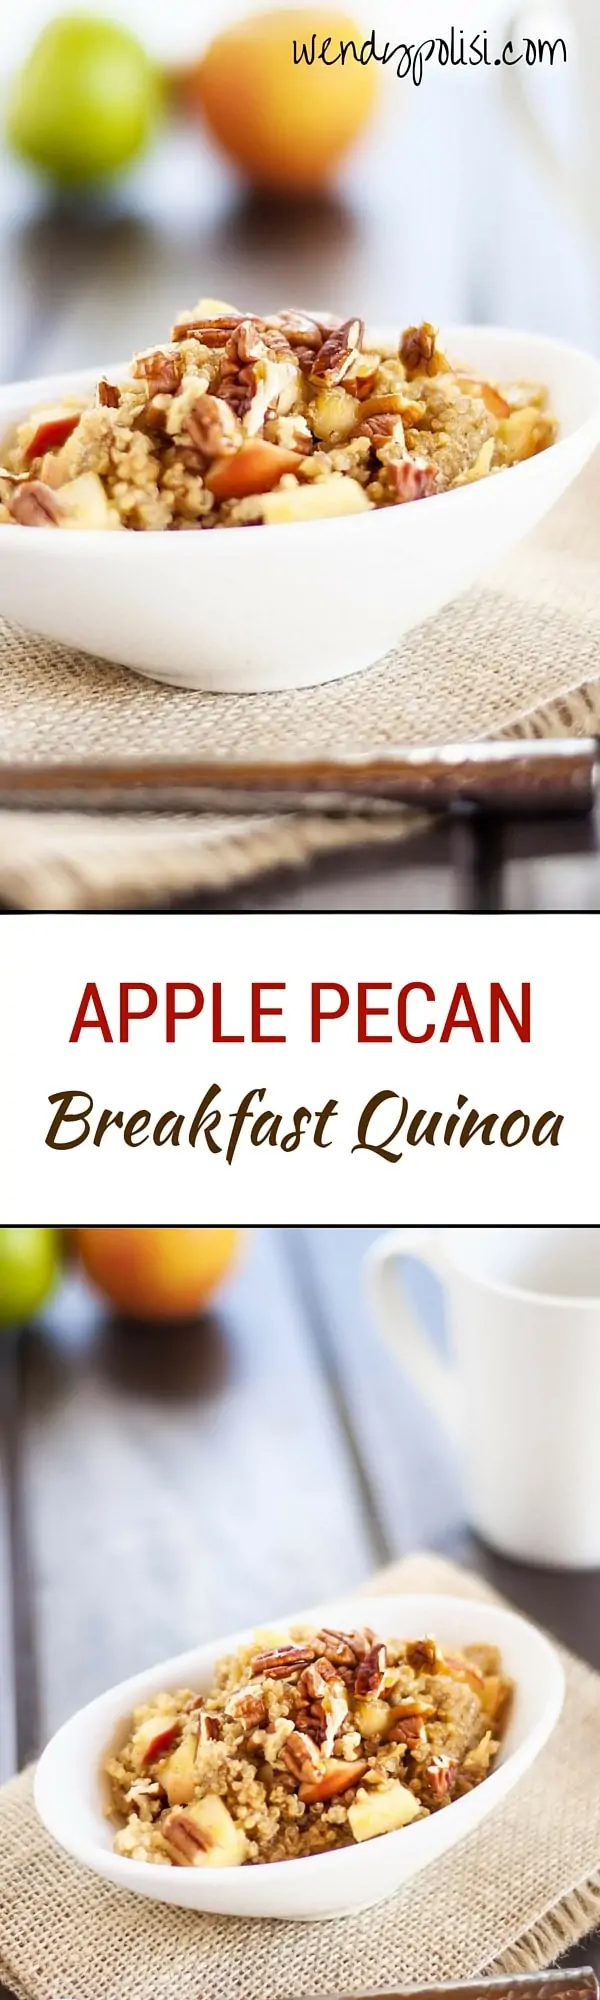 Apple Pecan Breakfast Quinoa - This healthy quinoa breakfast recipe is the perfect way to start the day. Easy & Delicious! - WendyPolisi.com